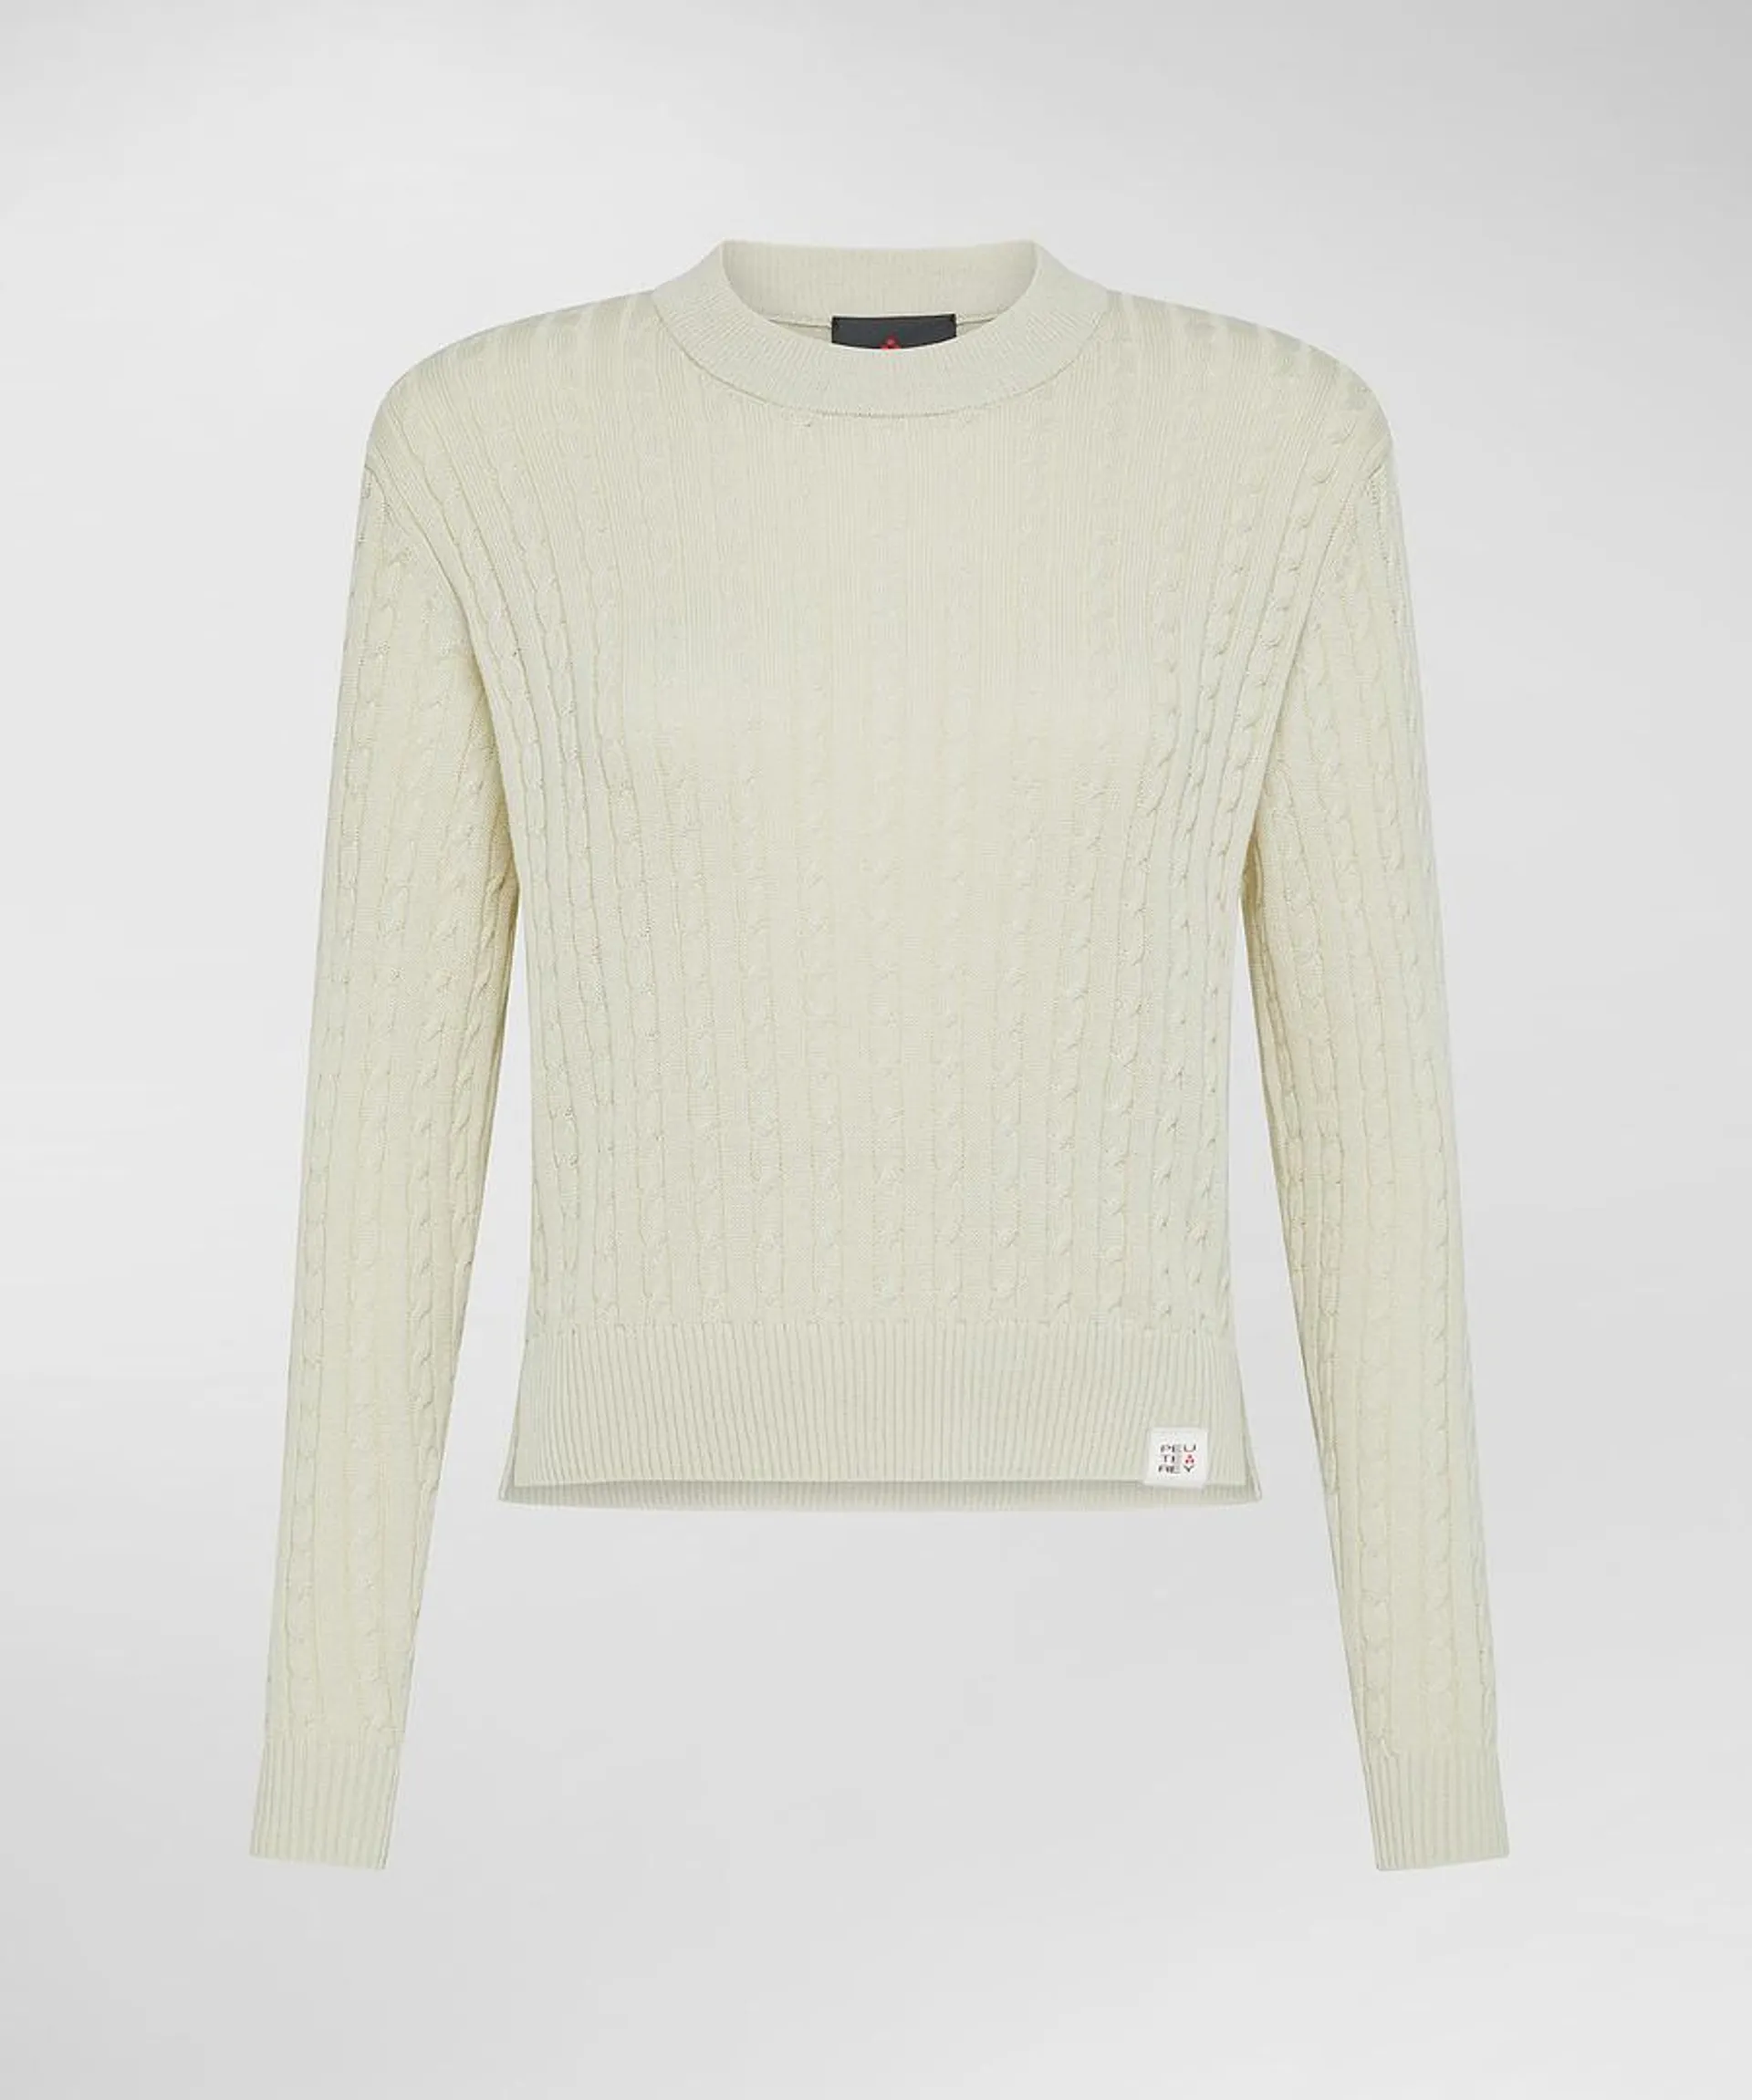 Cotton cable knit sweater